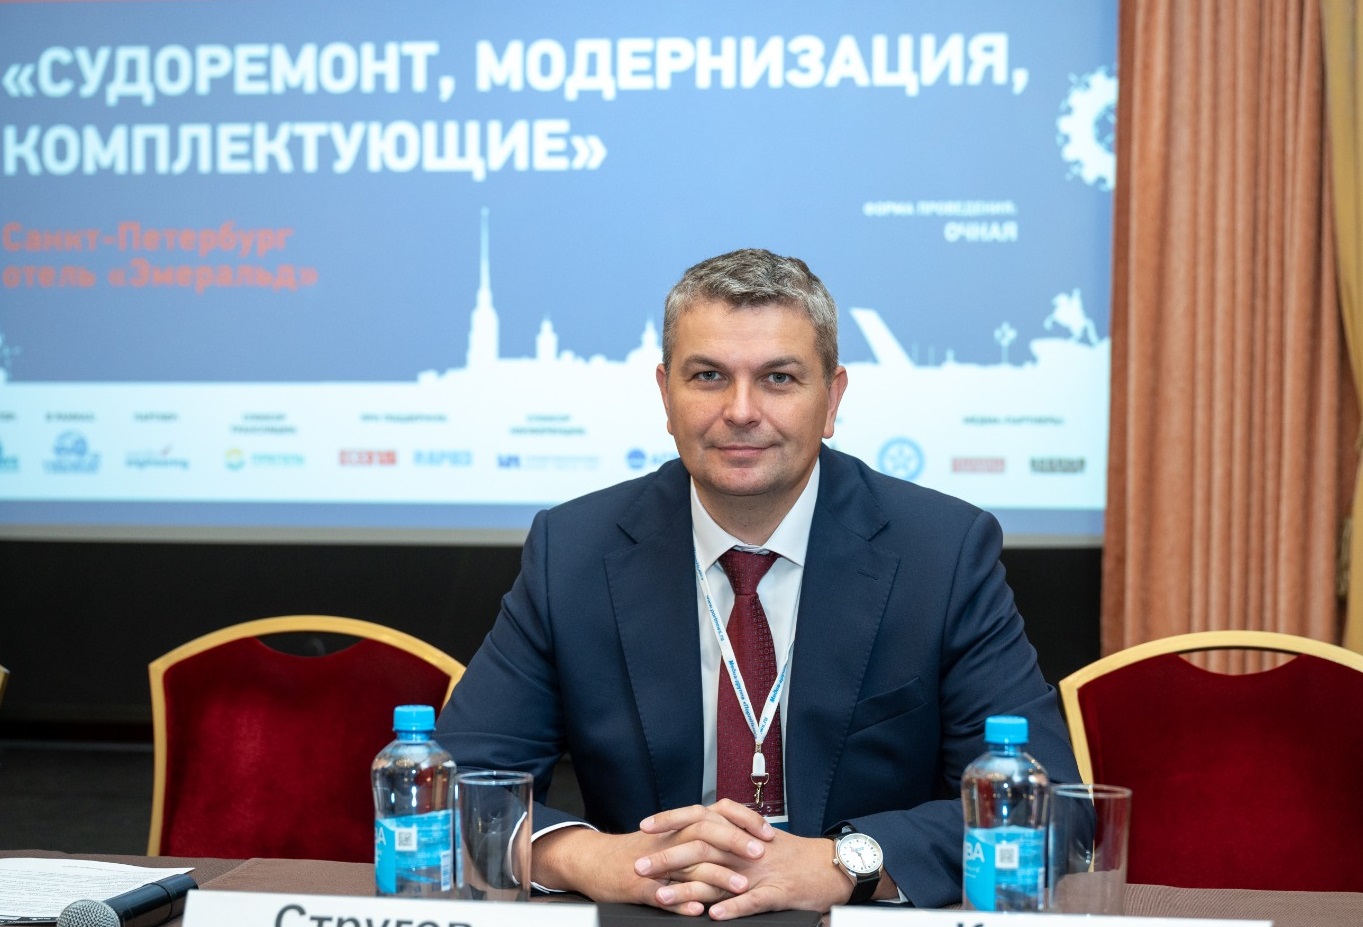 Vasily Strugov, who left the position of Deputy General Director of FSUE Rosmorport for Fleet, was appointed Executive Director of SDK LLC - a subsidiary of IRC LLC